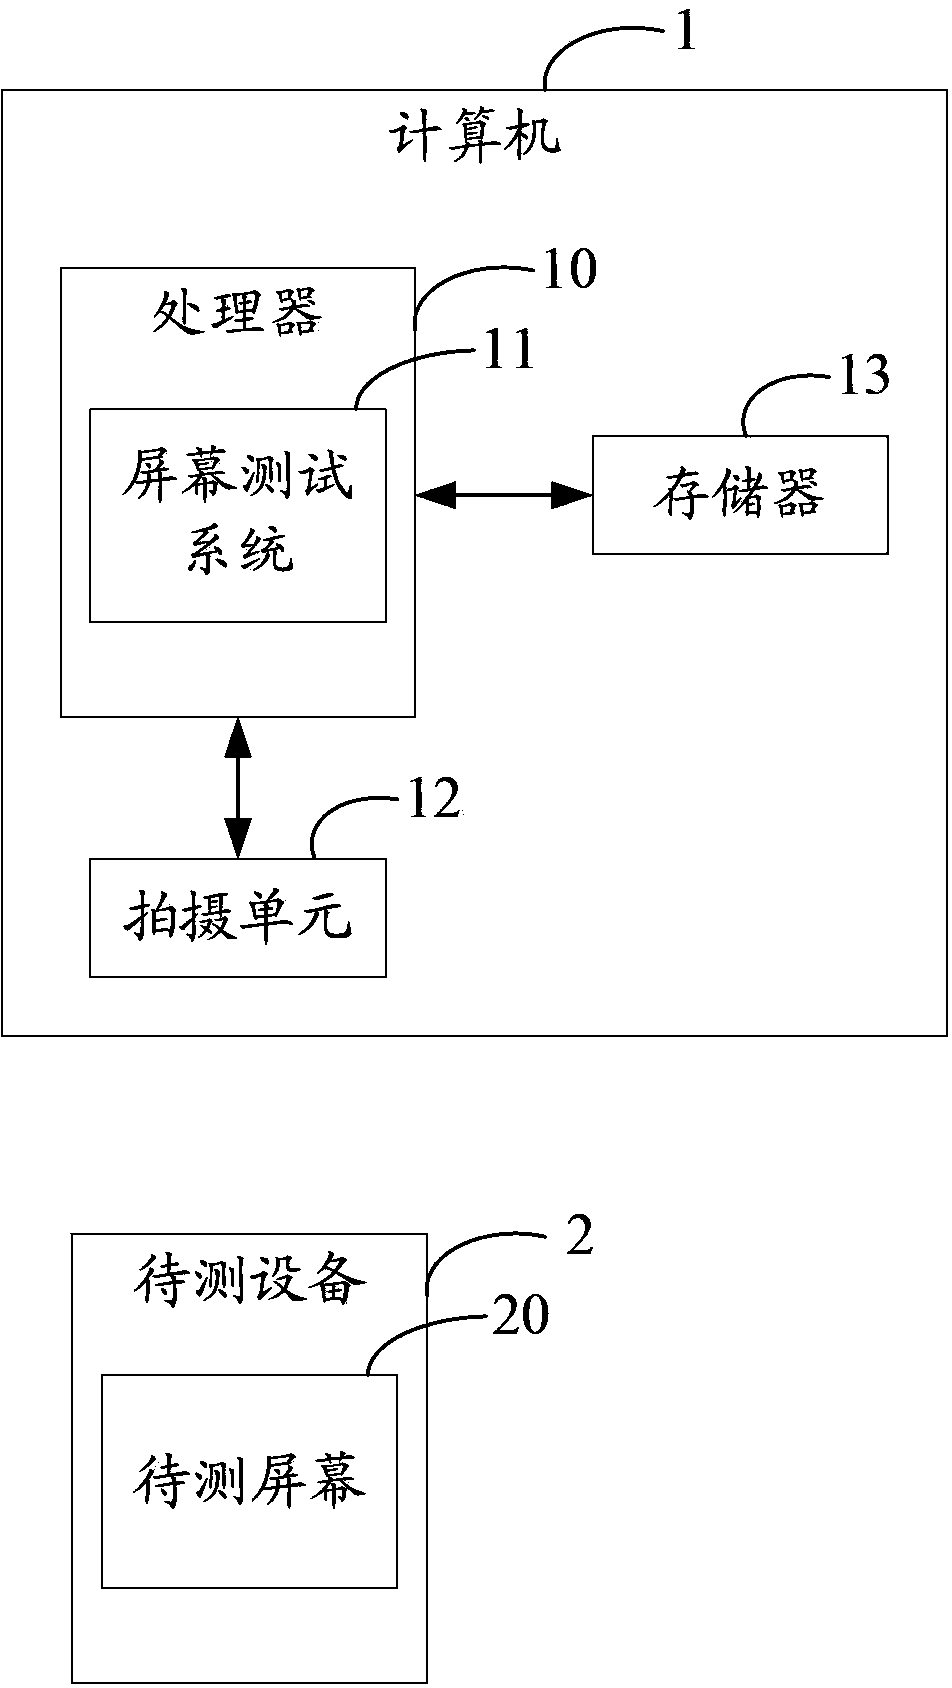 Screen test system and method